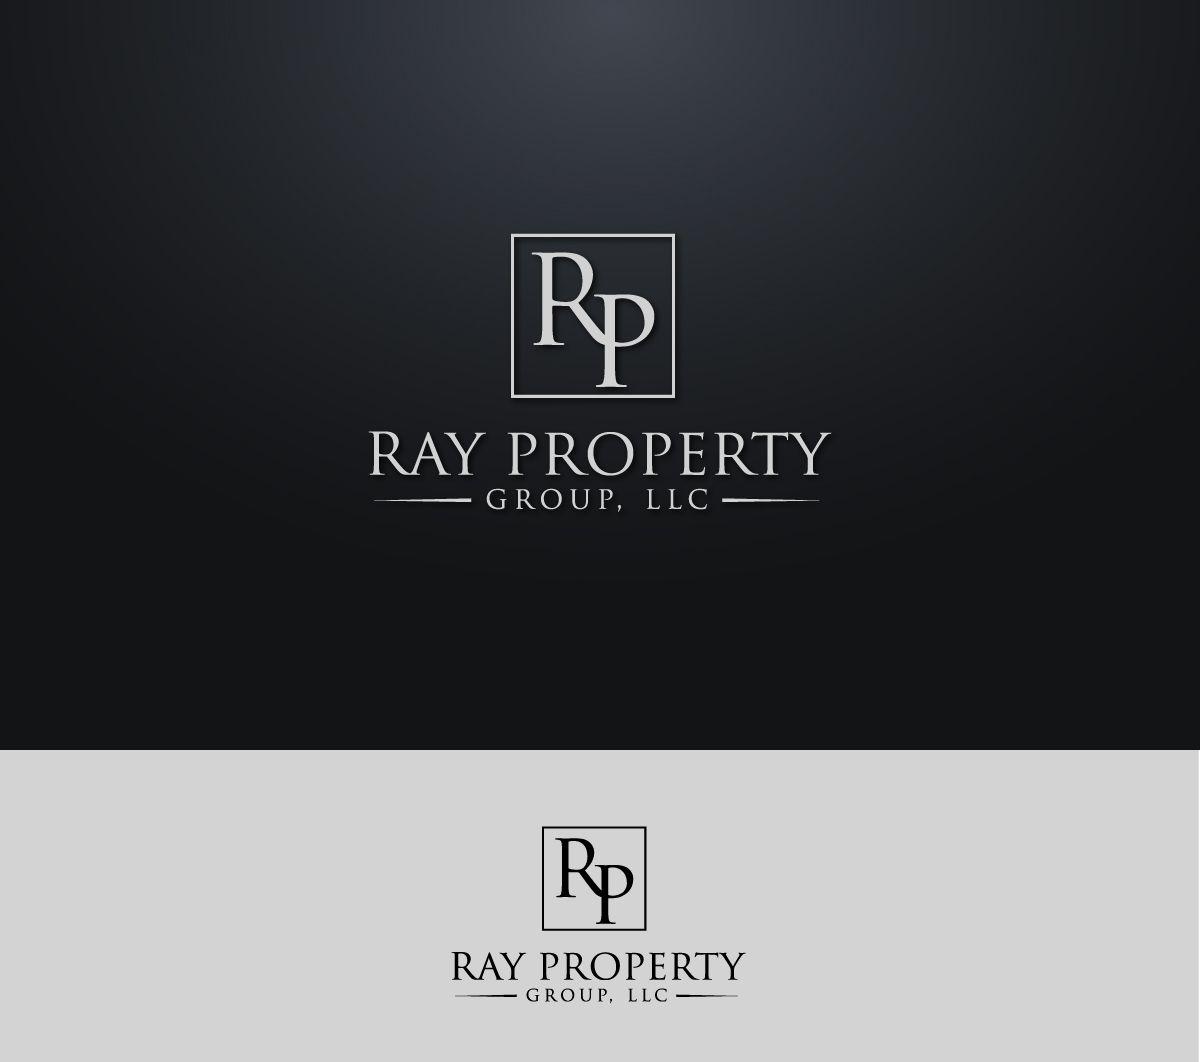 Silver Company Logo - Serious, Professional, Business Logo Design for Ray Property Group ...